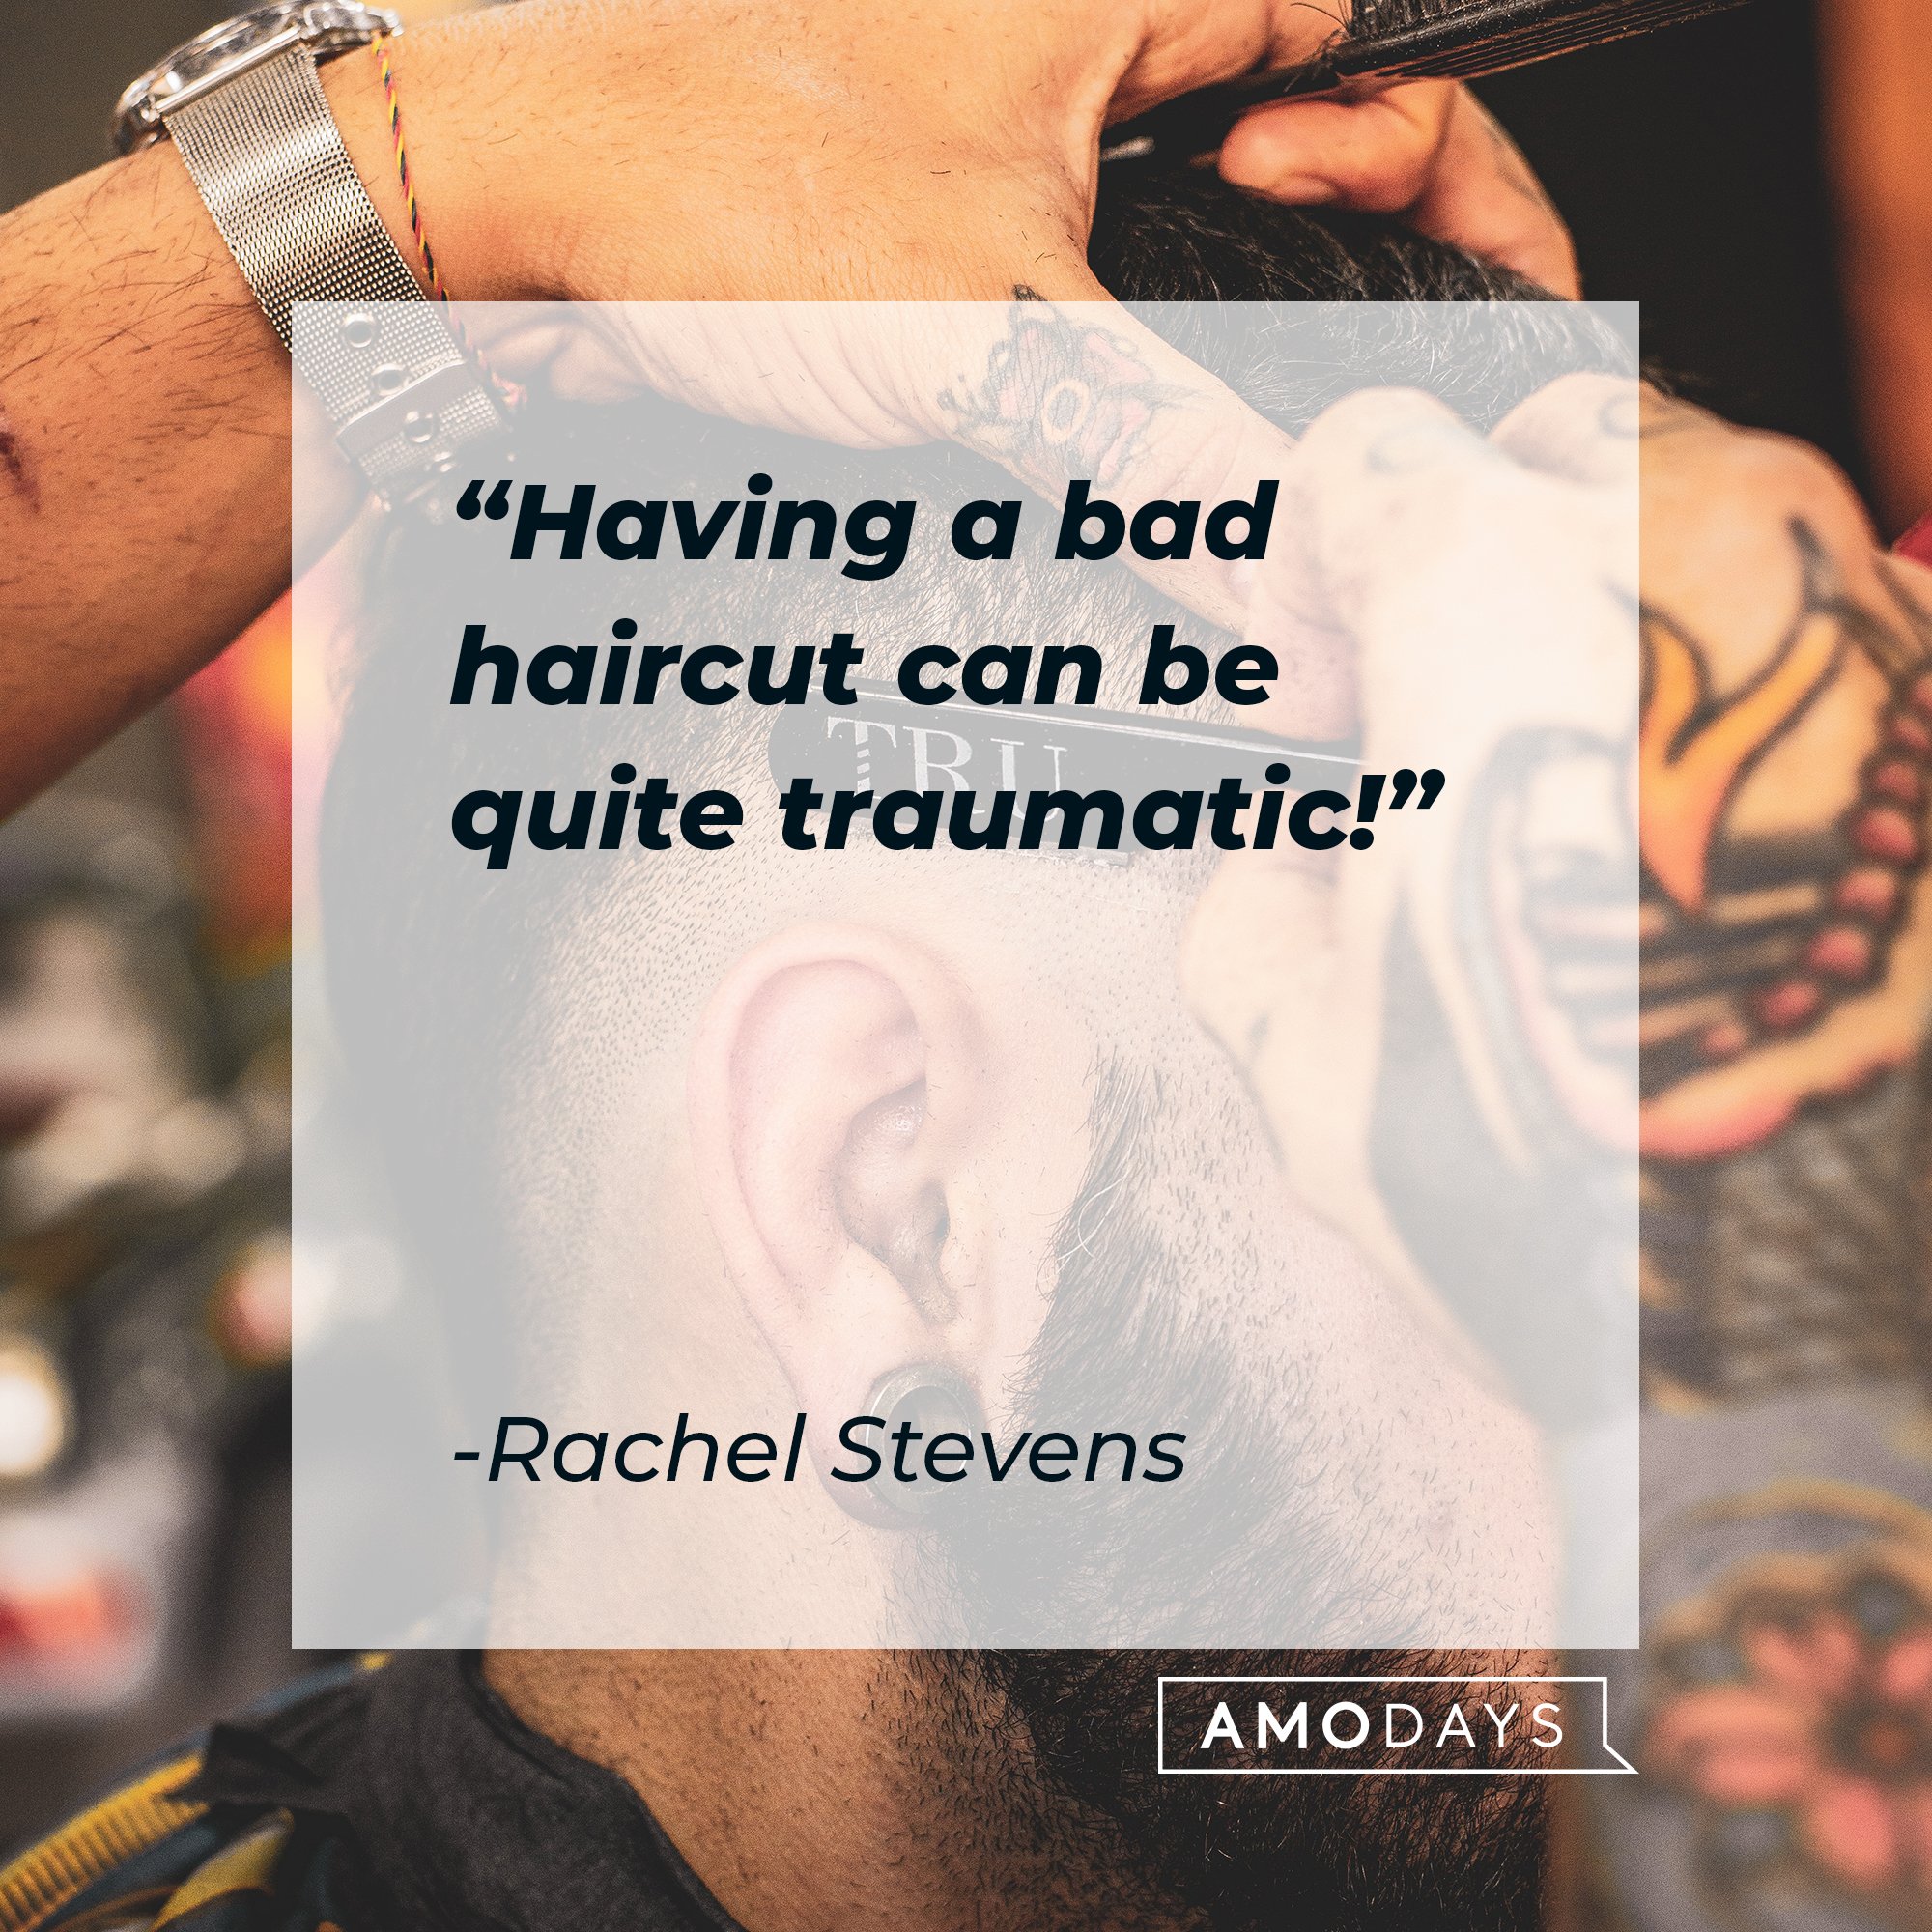 Rachel Stevens's quote: "Having a bad haircut can be quite traumatic!" | Image: AmoDays